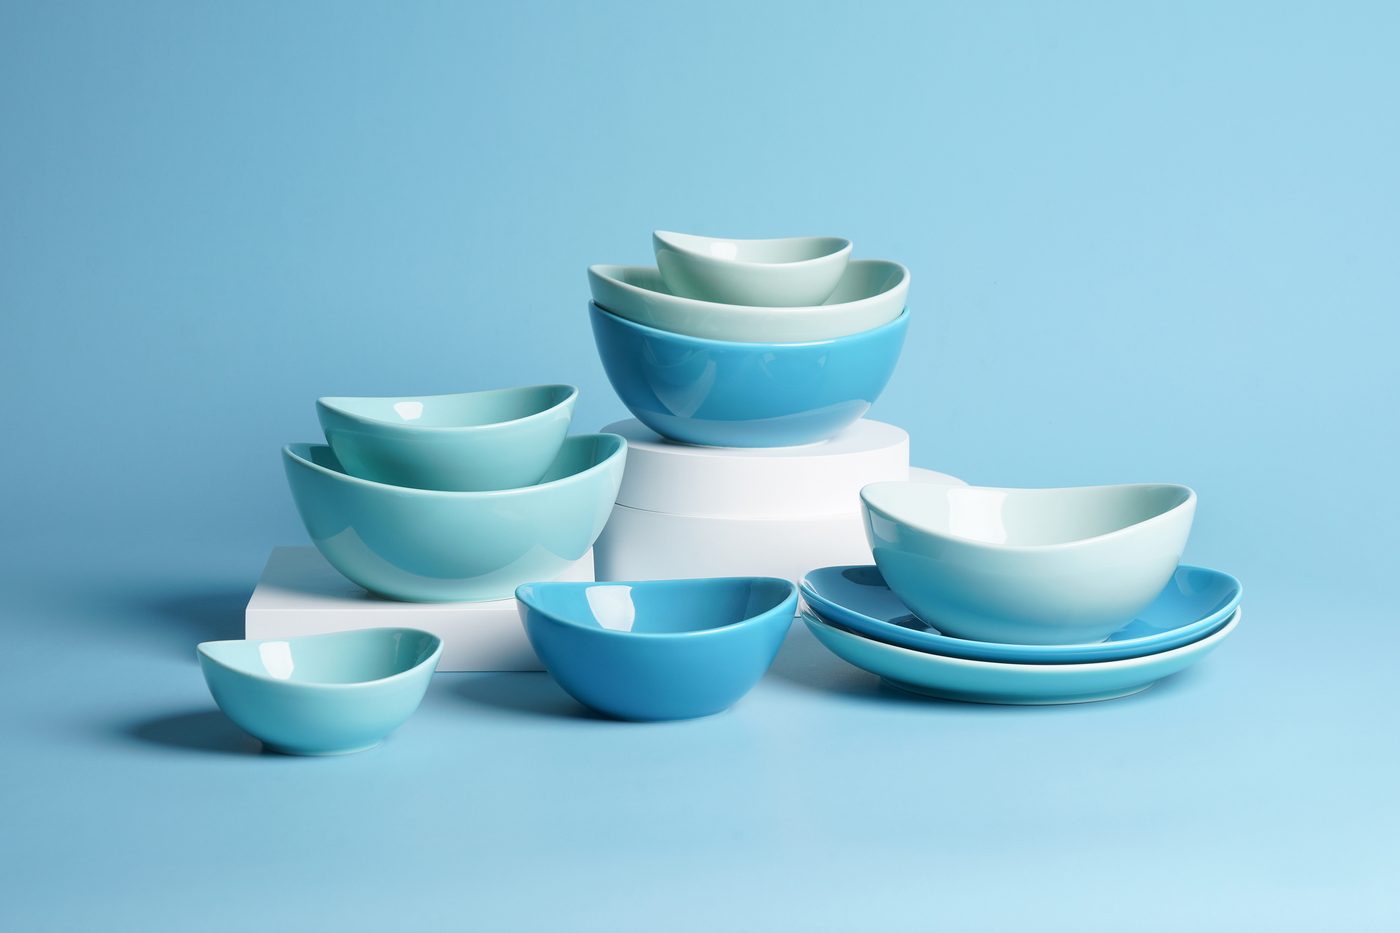 Sweese porcelain cool assorted dinnerware, plate sets, bowl sets, blue Nordic style | Sweese